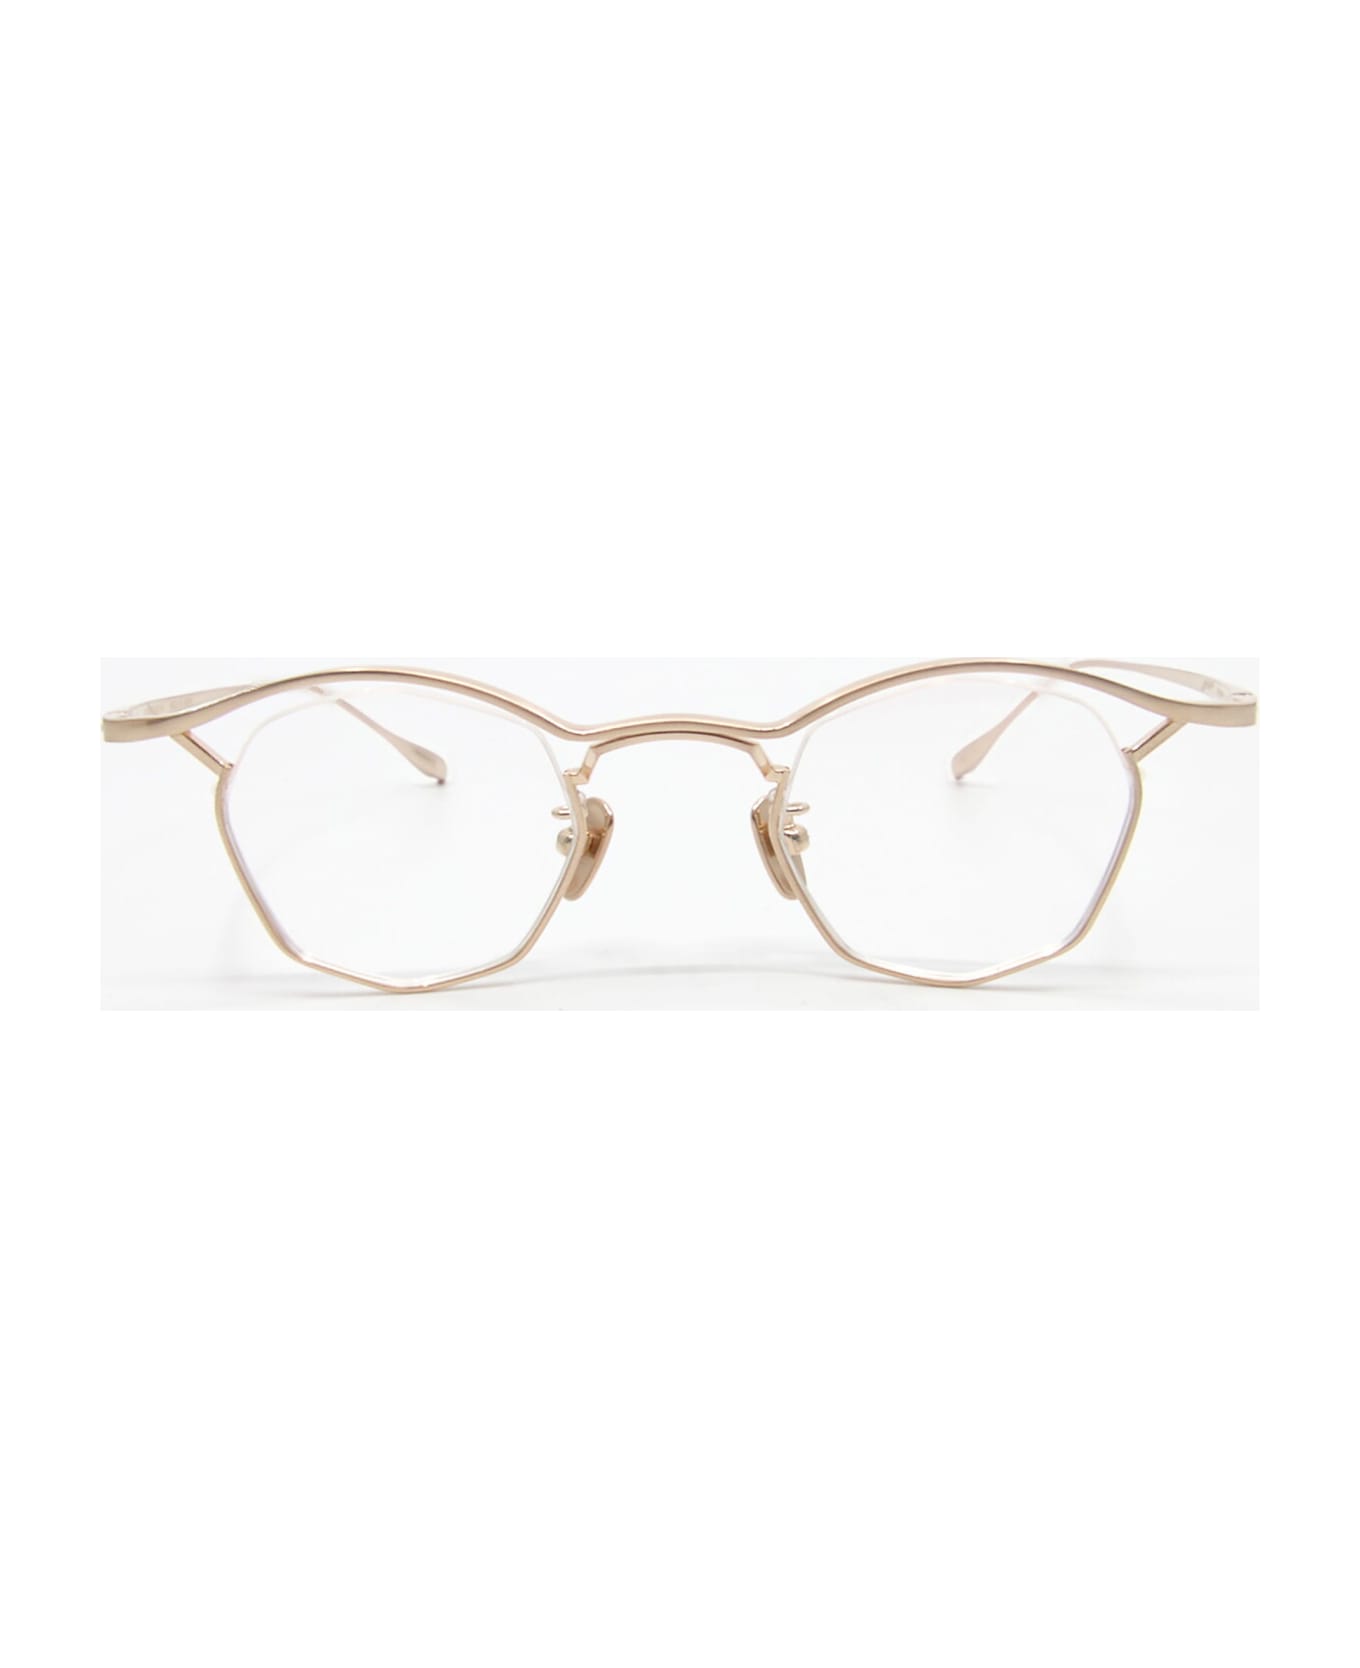 FACTORY900 Titanos X Factory900 Mf-002 - Gold Rx Glasses - Gold